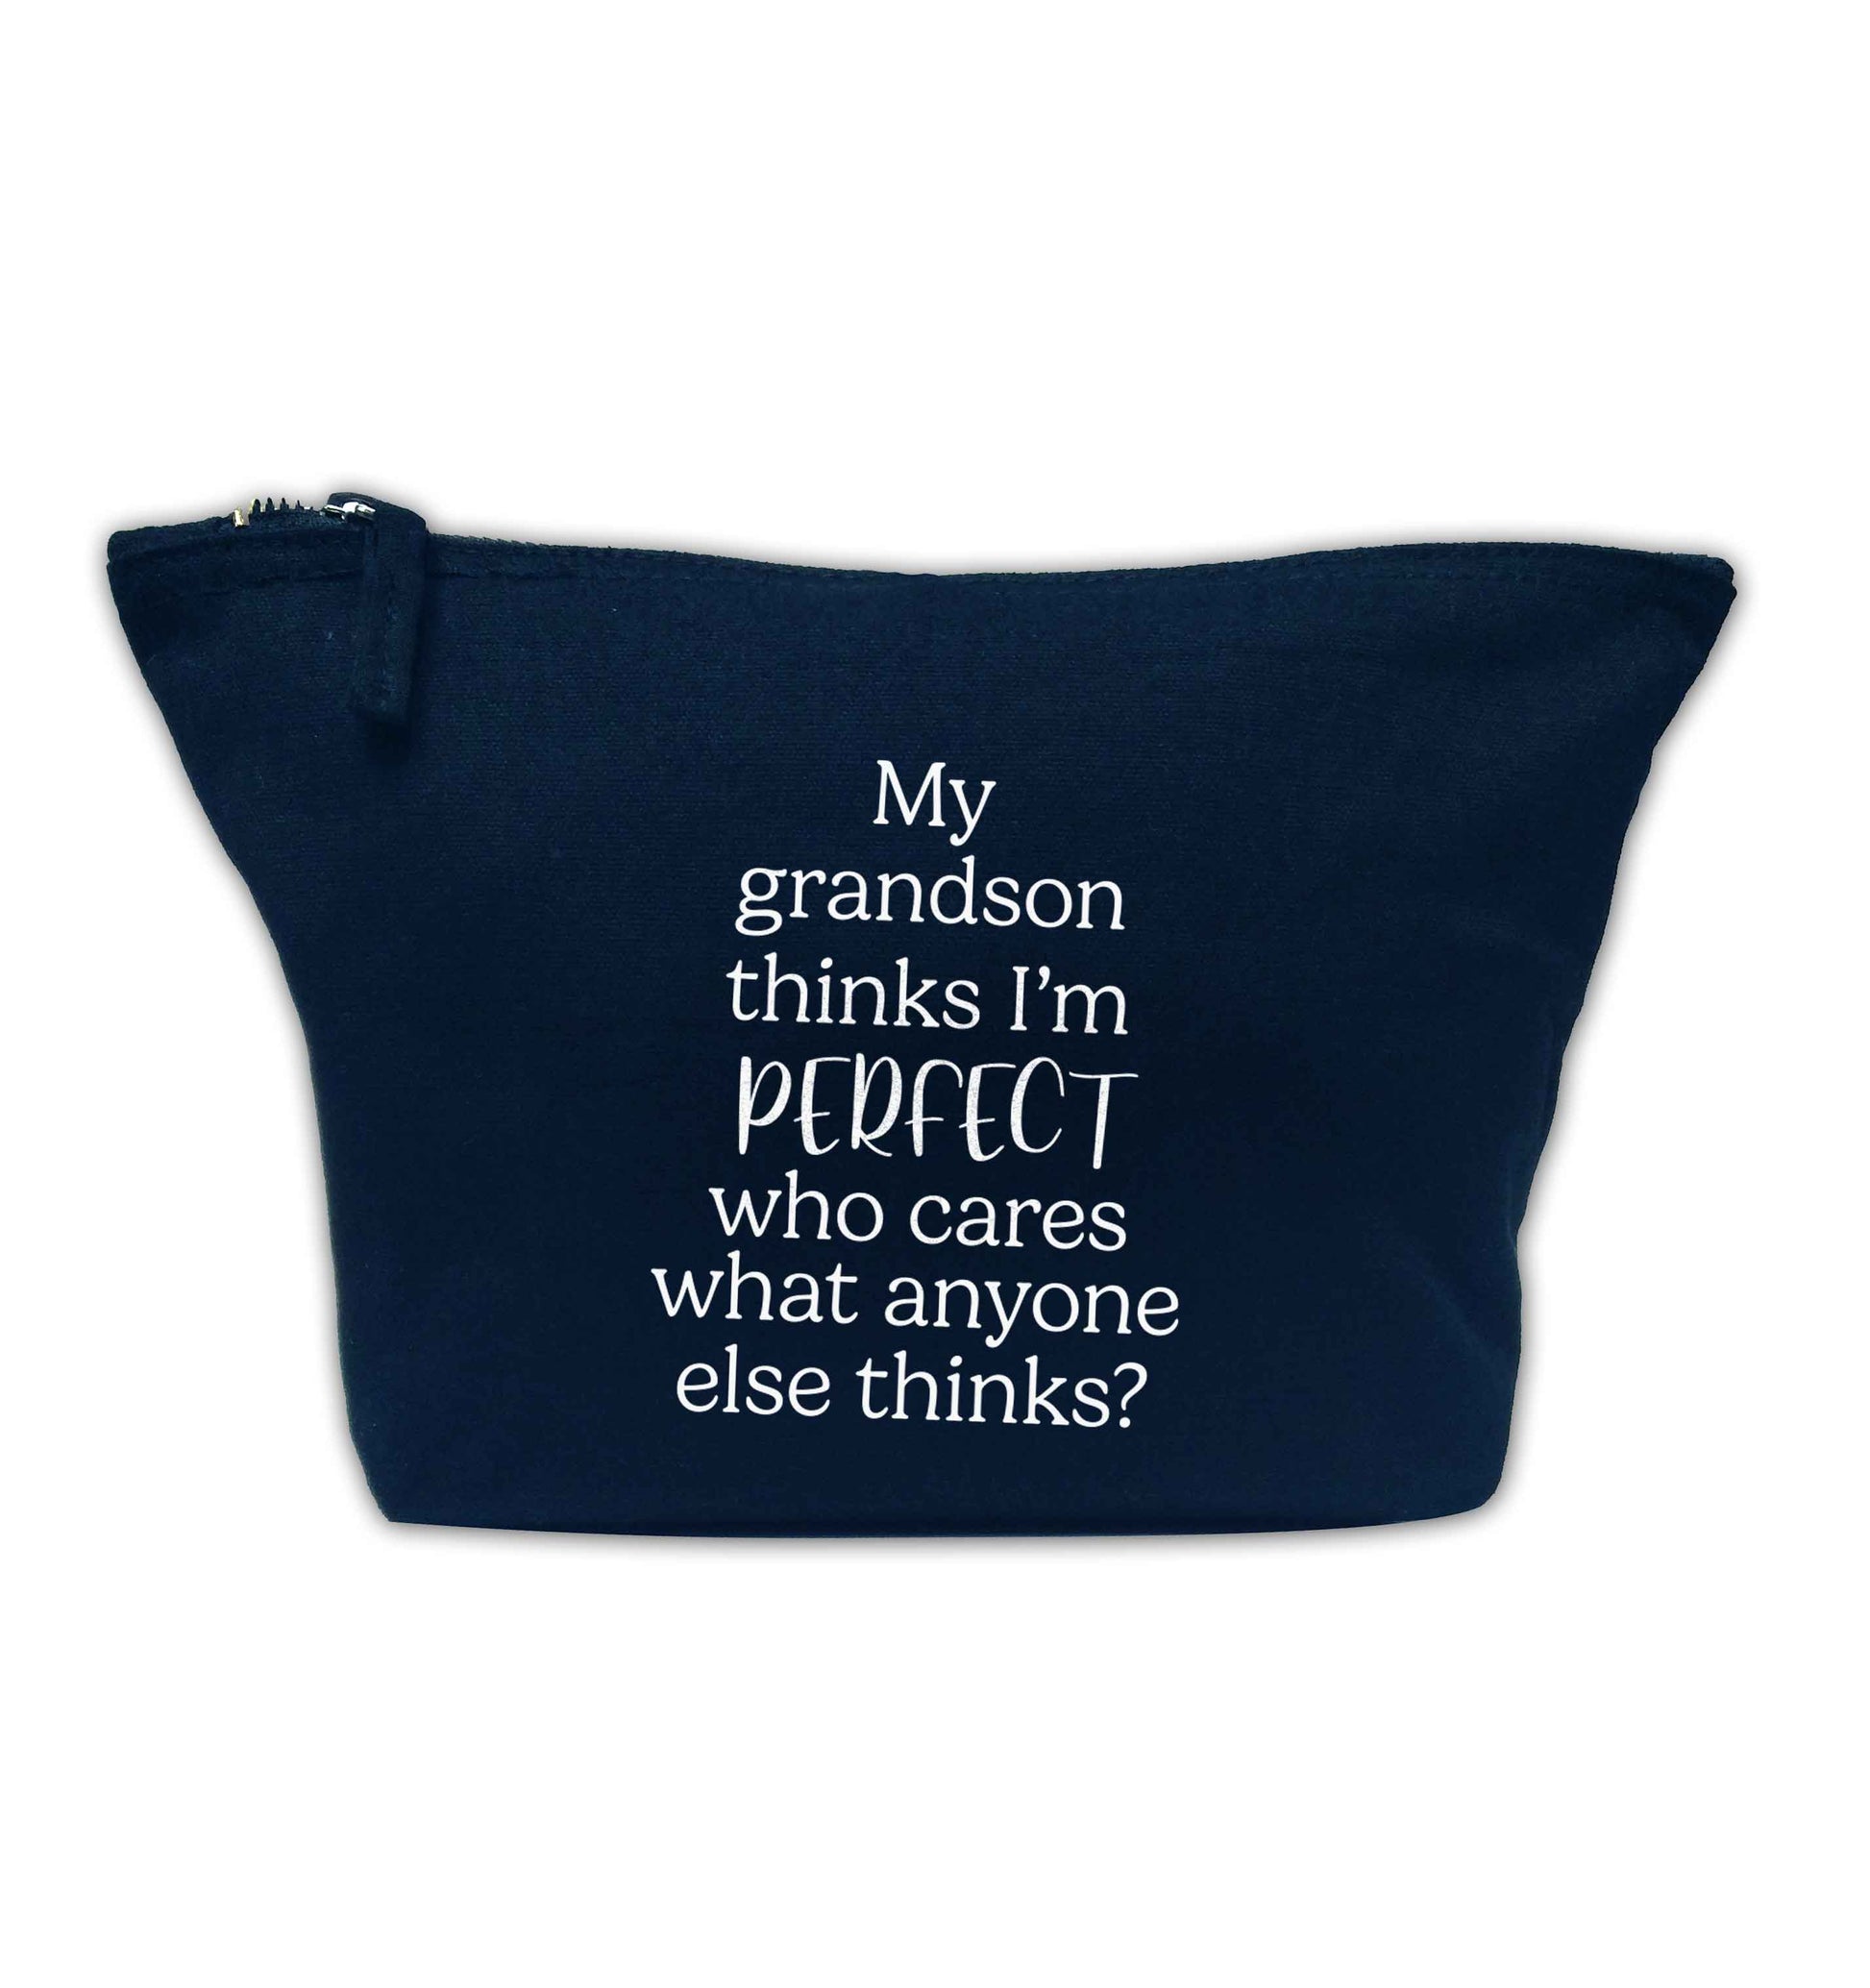 My Grandson thinks I'm perfect who cares what anyone else thinks? navy makeup bag